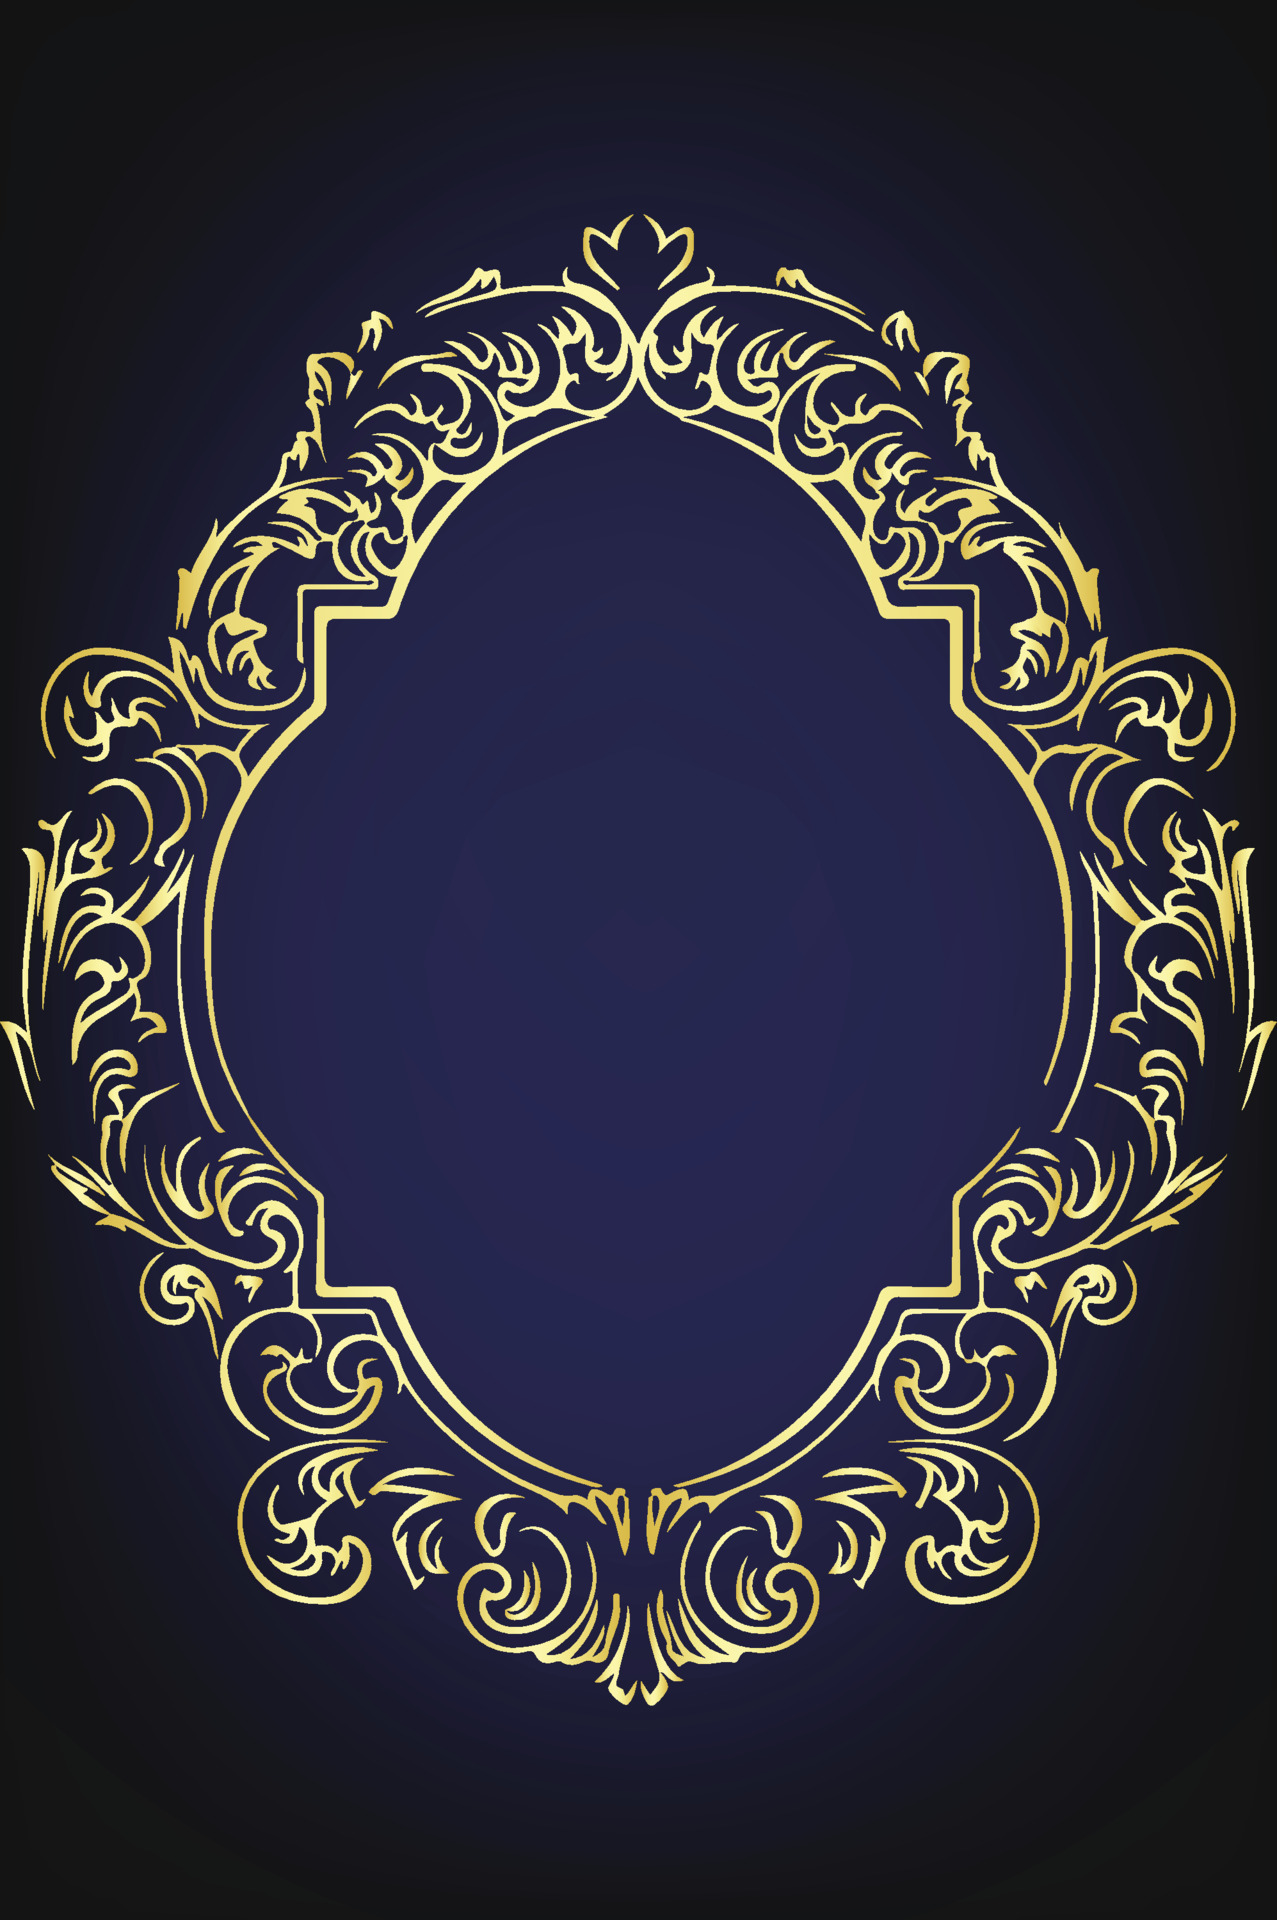 Abstract Vector golden Floral Frame Background Free Vector File ...